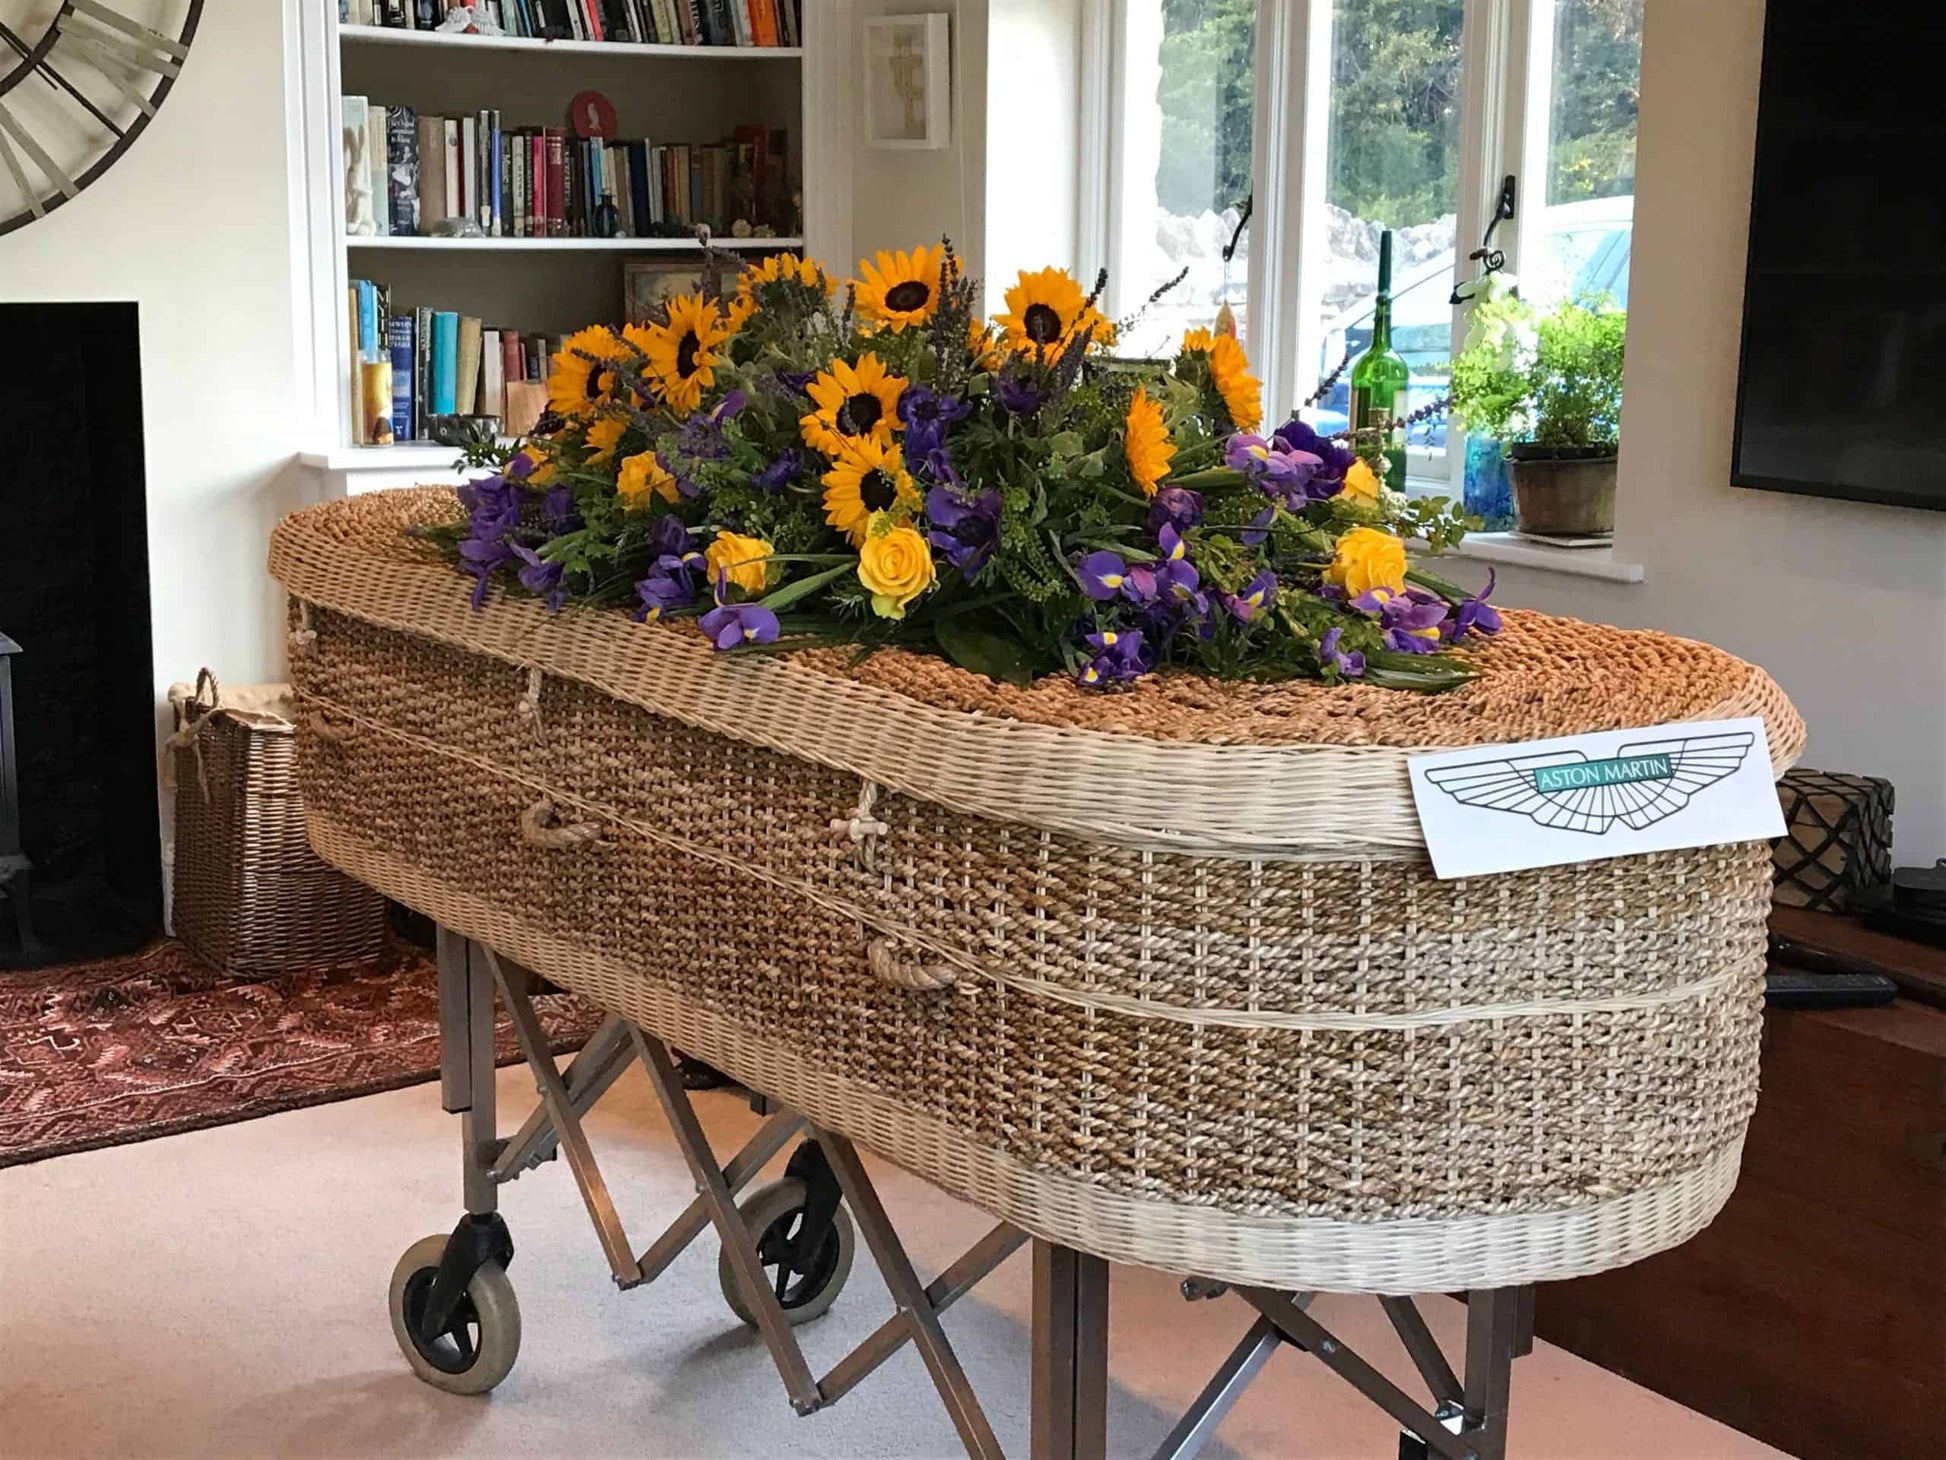 Elegantly crafted wicker coffin embellished with a colorful array of sunflowers and purple flowers, displayed on a trolley in a home library with a garden view.